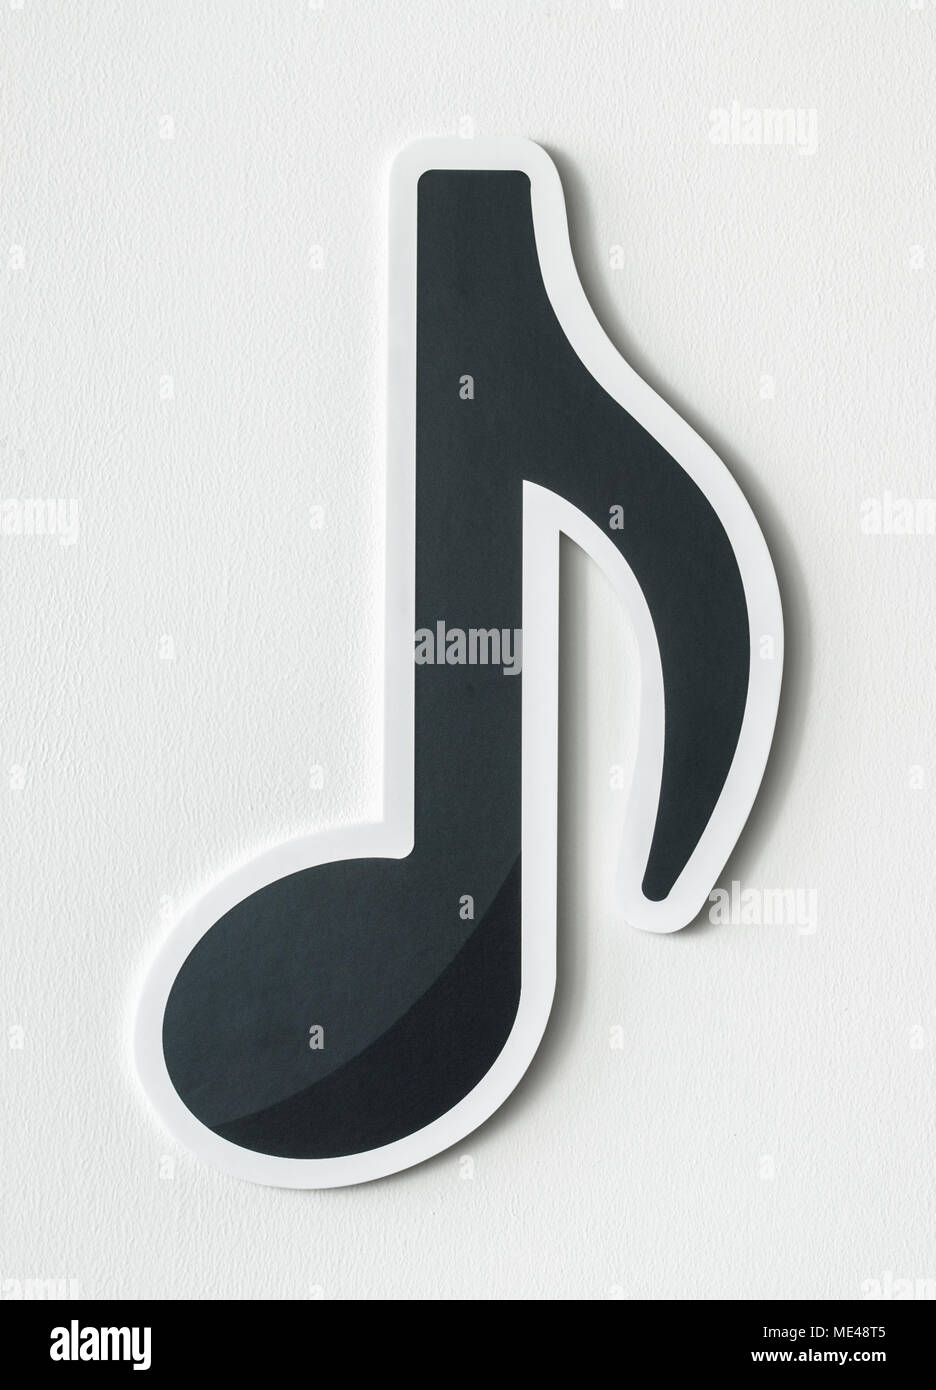 Musical note audio cut out icon Stock Photo